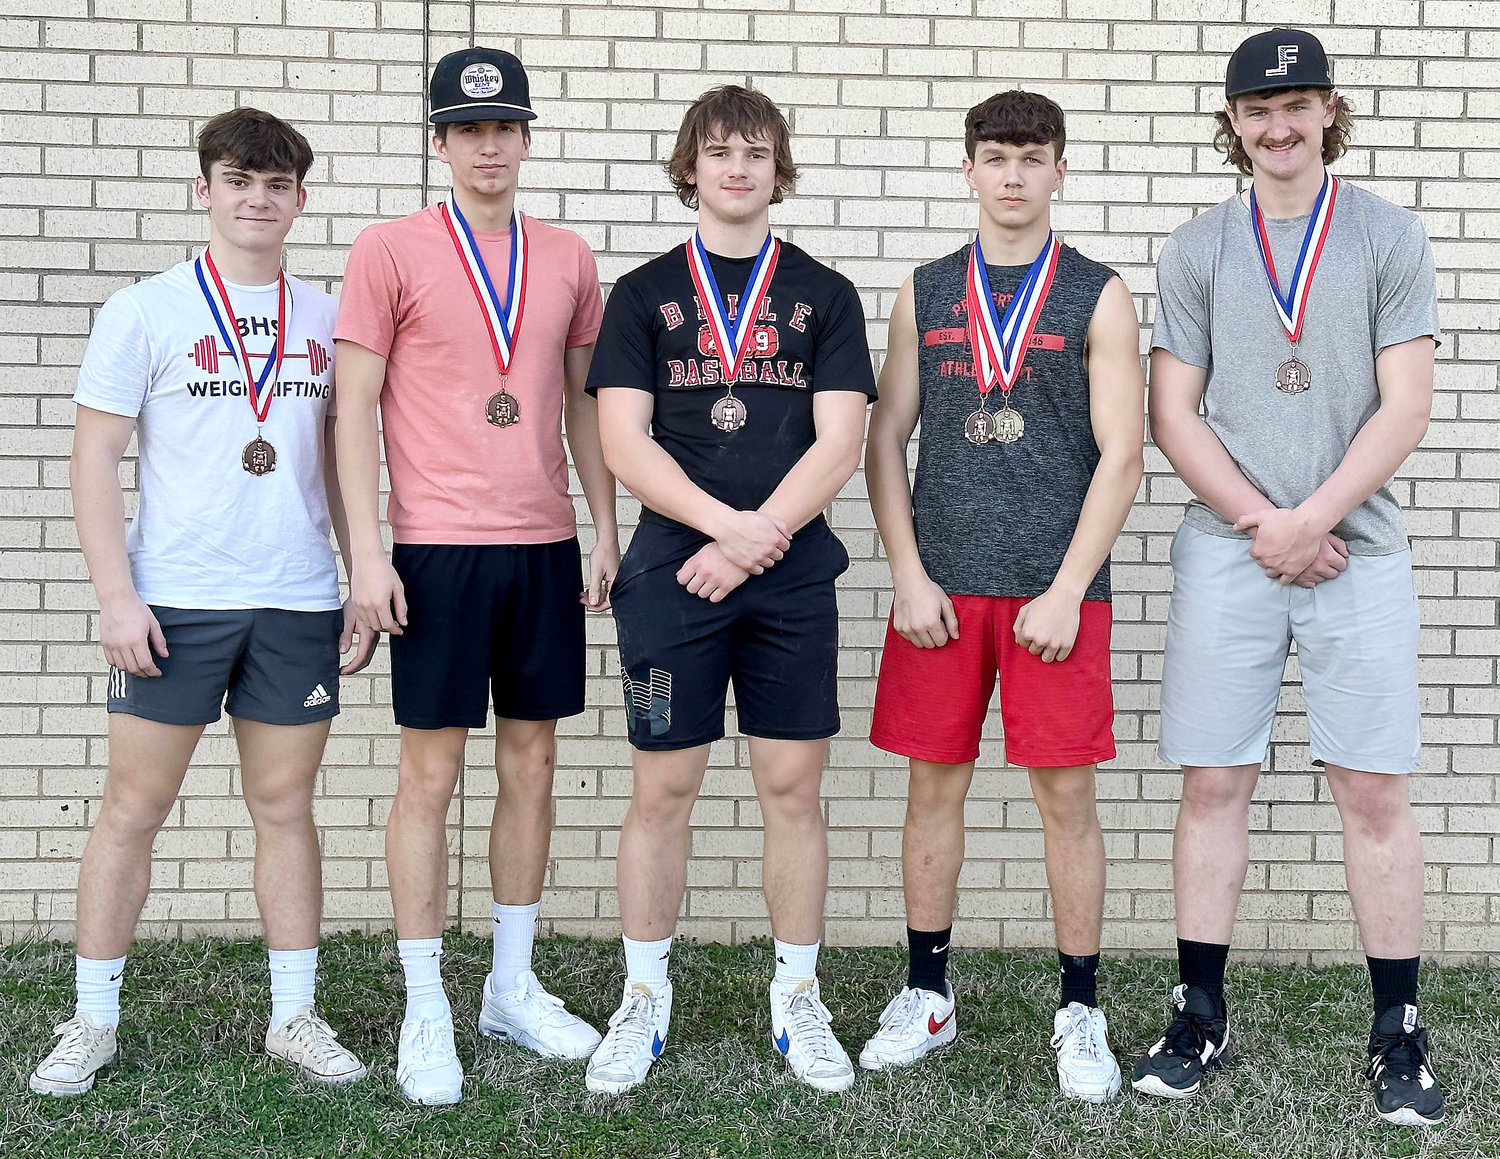 Belle High School students (from left) competing at the Missouri High School State Power lifting meet in Springfield over the weekend included Rance Horstman, Brayden Cadwallader, Kaiden Robertson, Jon Valley and Cole Loughridge.